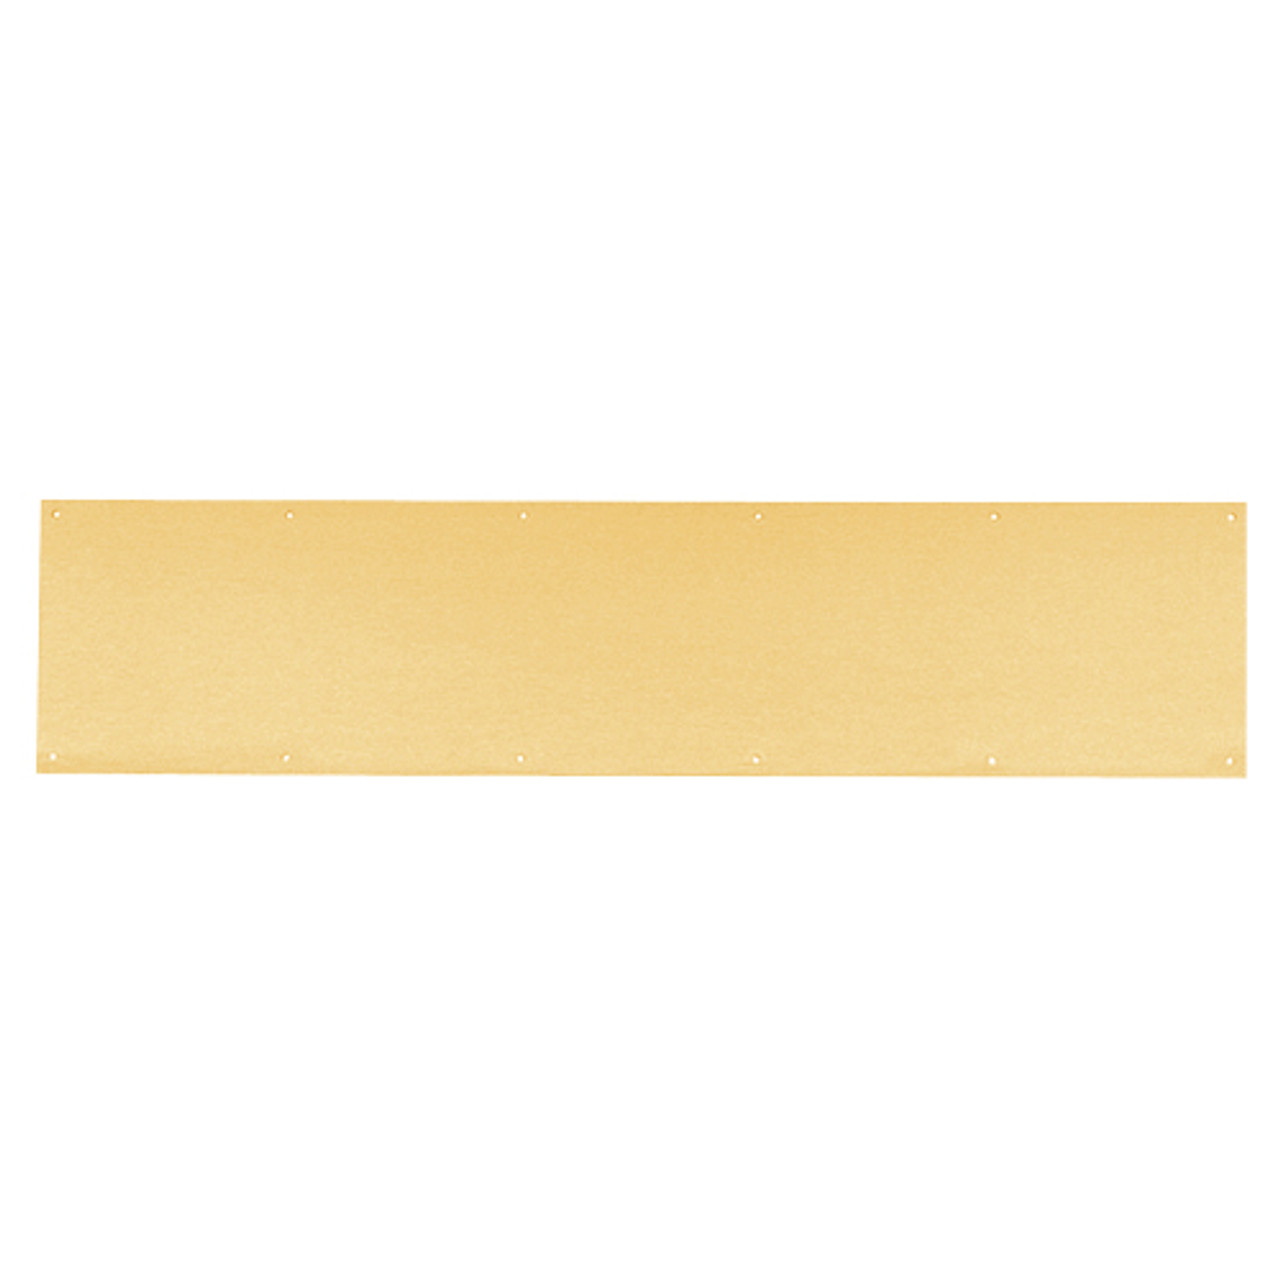 8400-US10-9x46-B-CS Ives 8400 Series Protection Plate in Satin Bronze